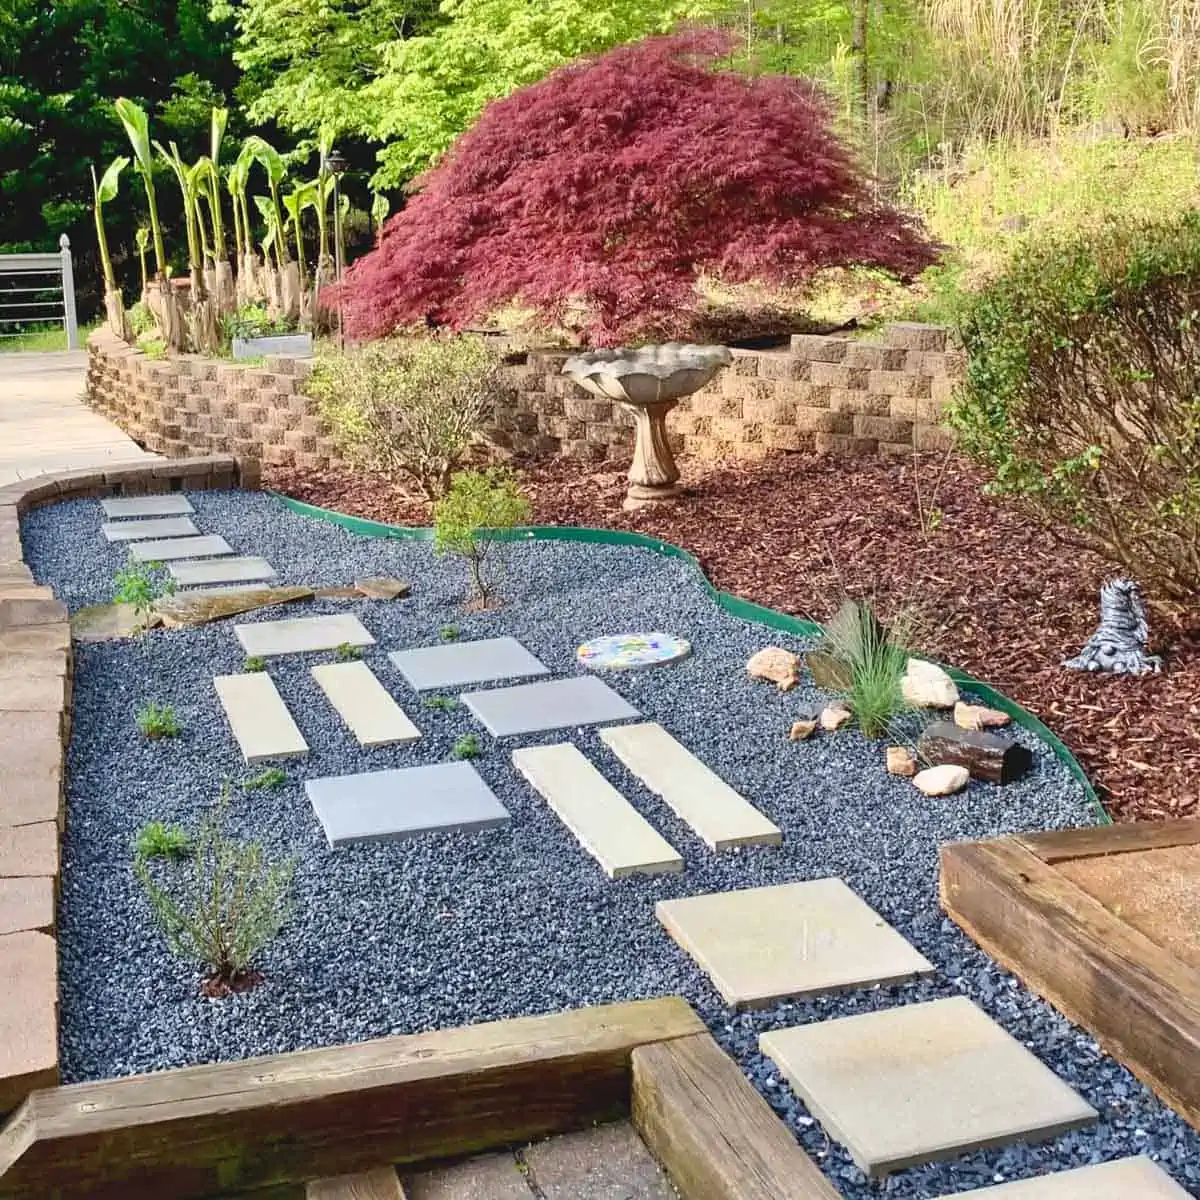 finished gravel garden with stepping stones of various shapes and colors and plants weaved in between and around them